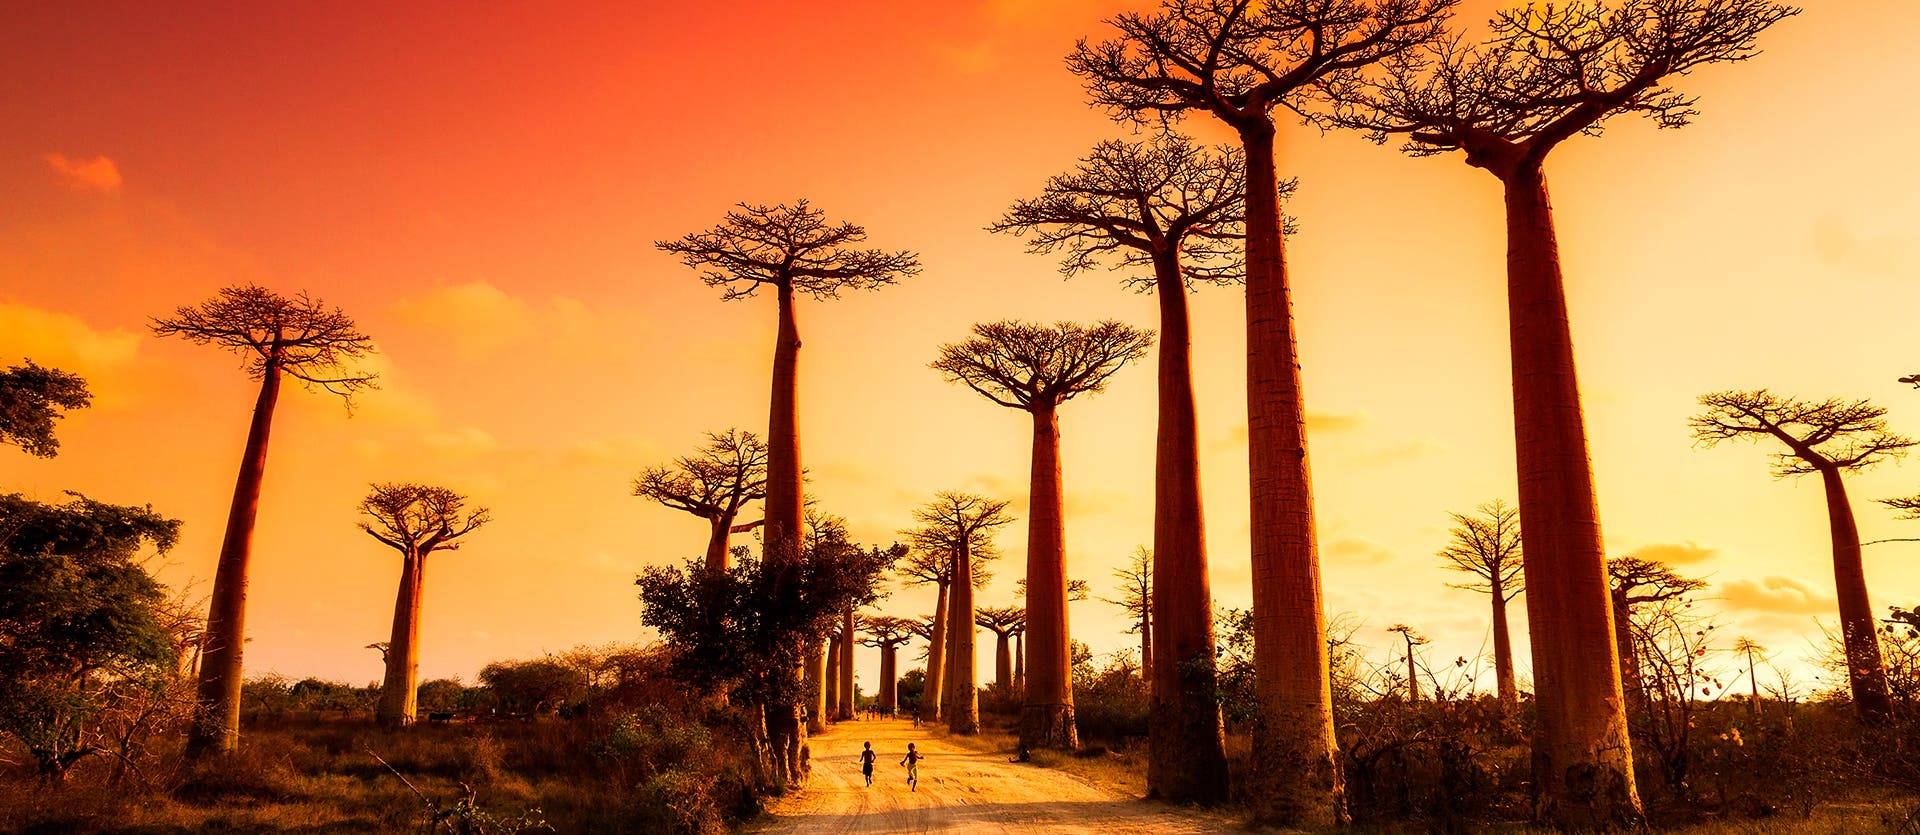 Land of the Baobabs